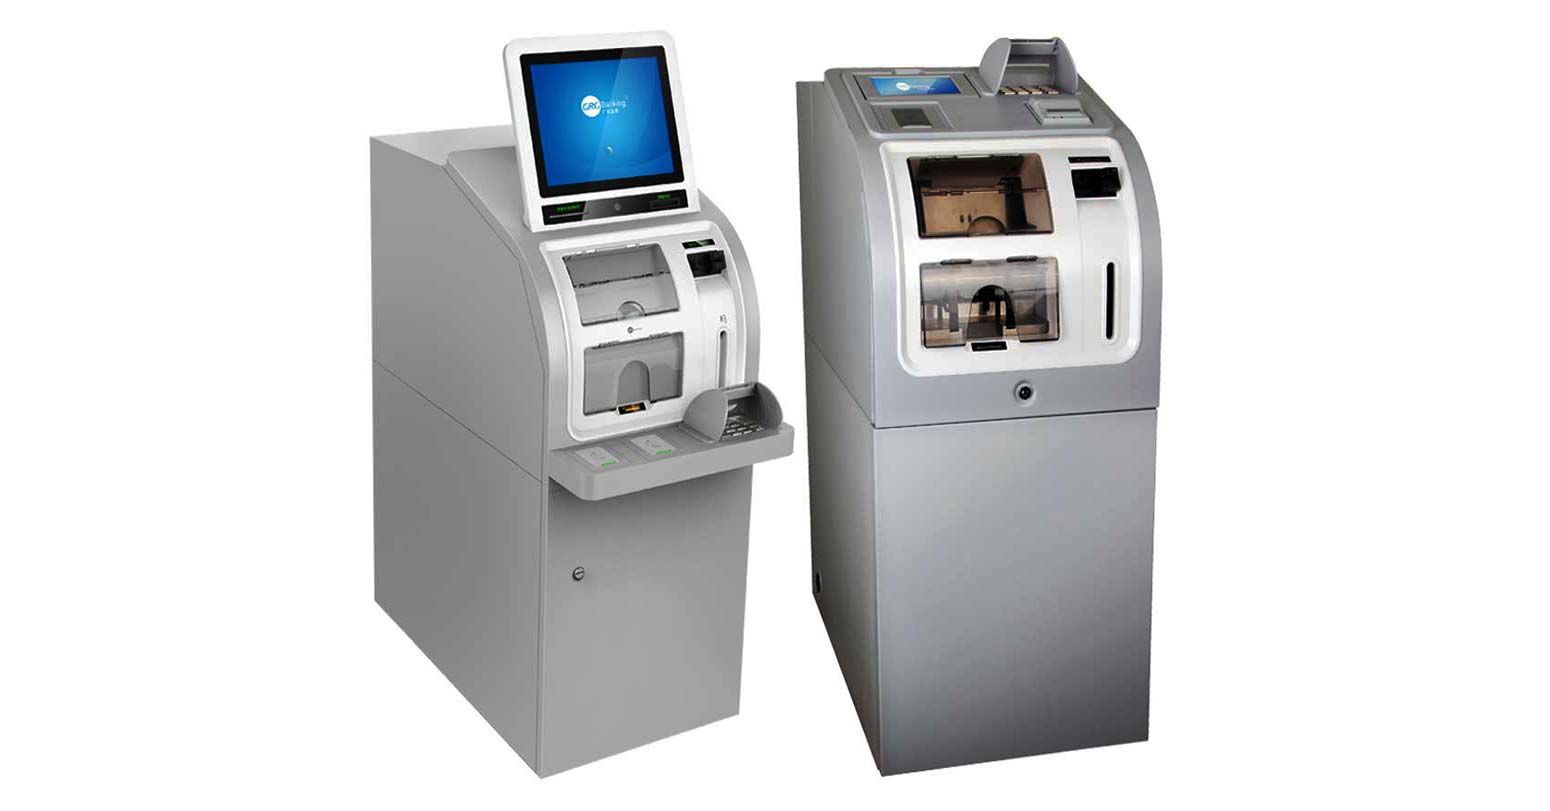 Now withdraw cash form ATM with mobile